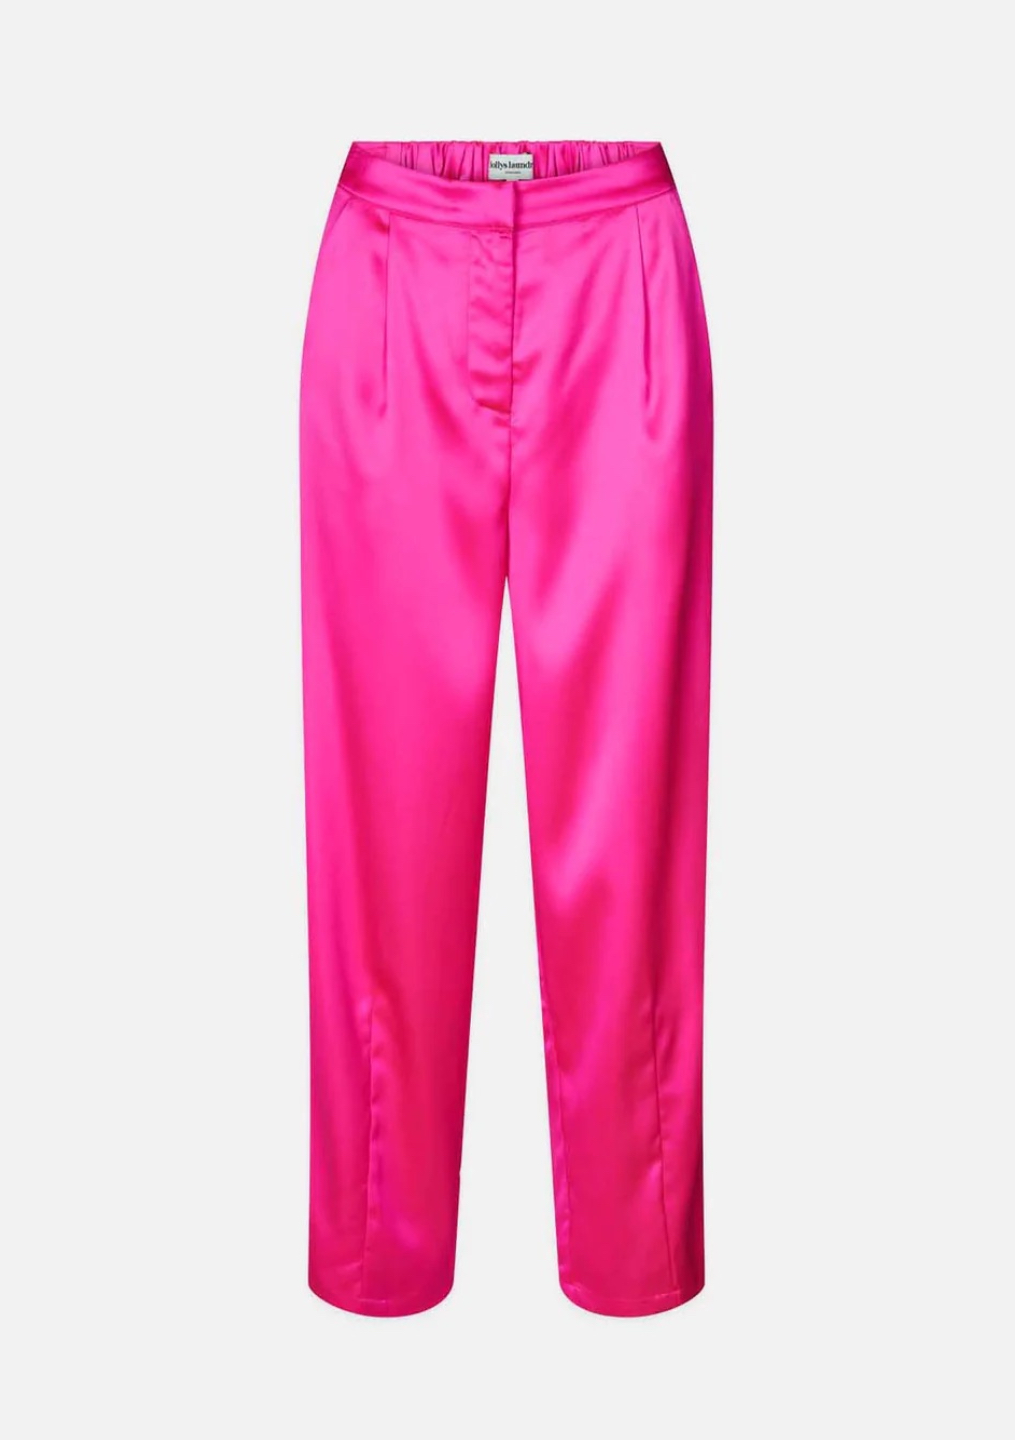 Lolly's Laundry | Maisie Pants - Pink - Contain Boutique